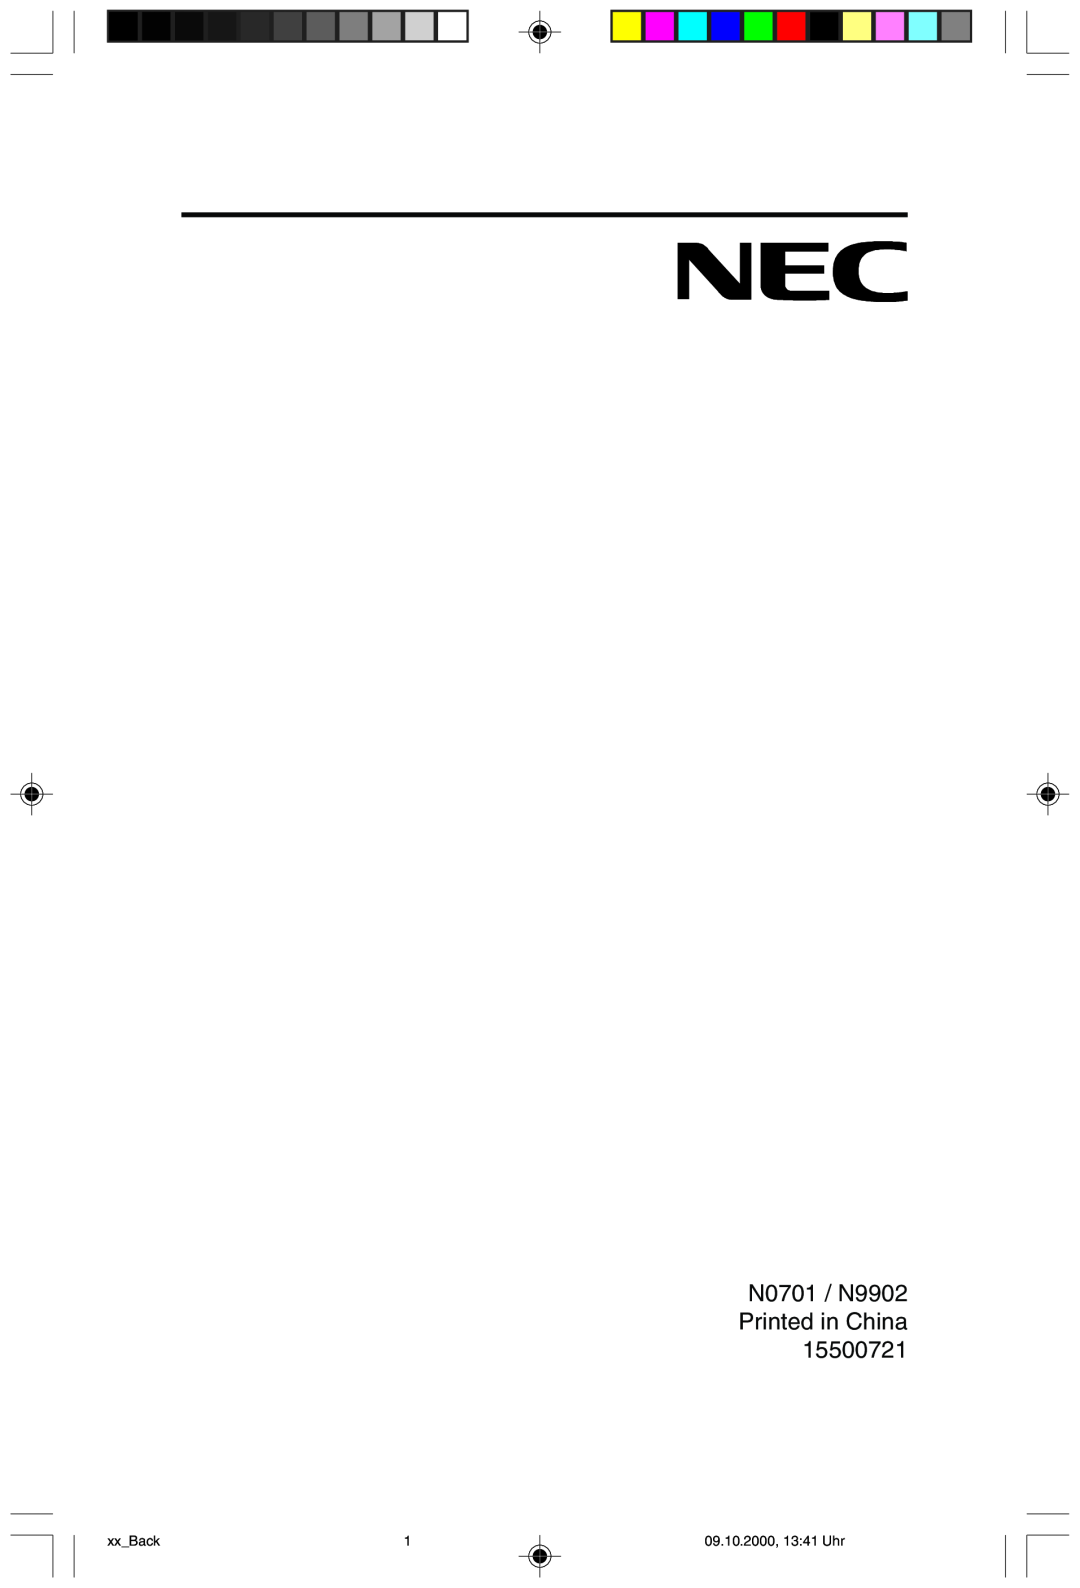 NEC 95F user manual N0701 / N9902 Printed in China, xxBack, 09.10.2000, 1341 Uhr 